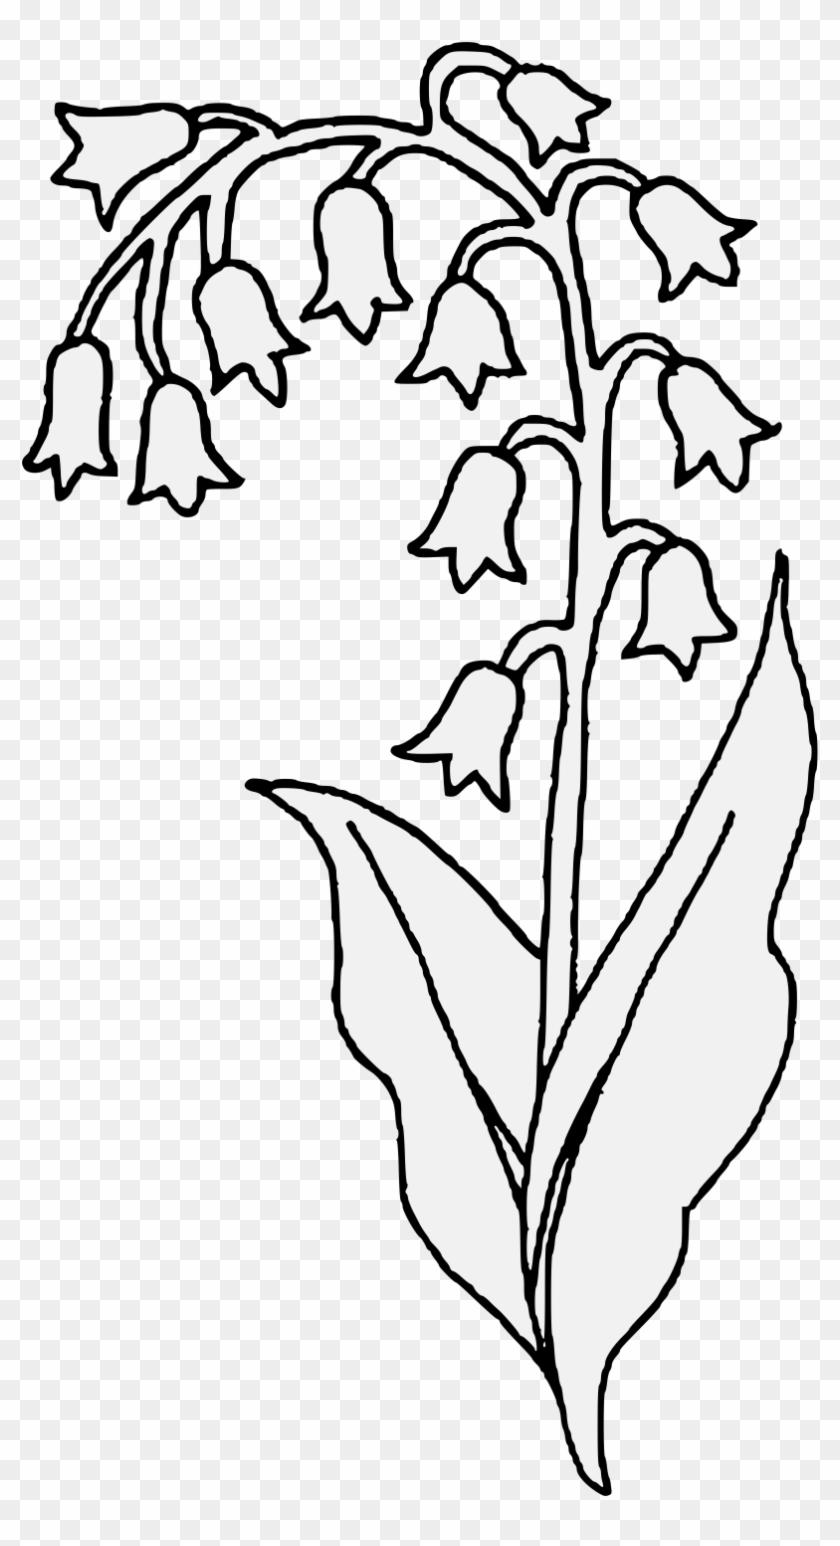 Pdf - Lily Of The Valley Hand Drawn #1040023